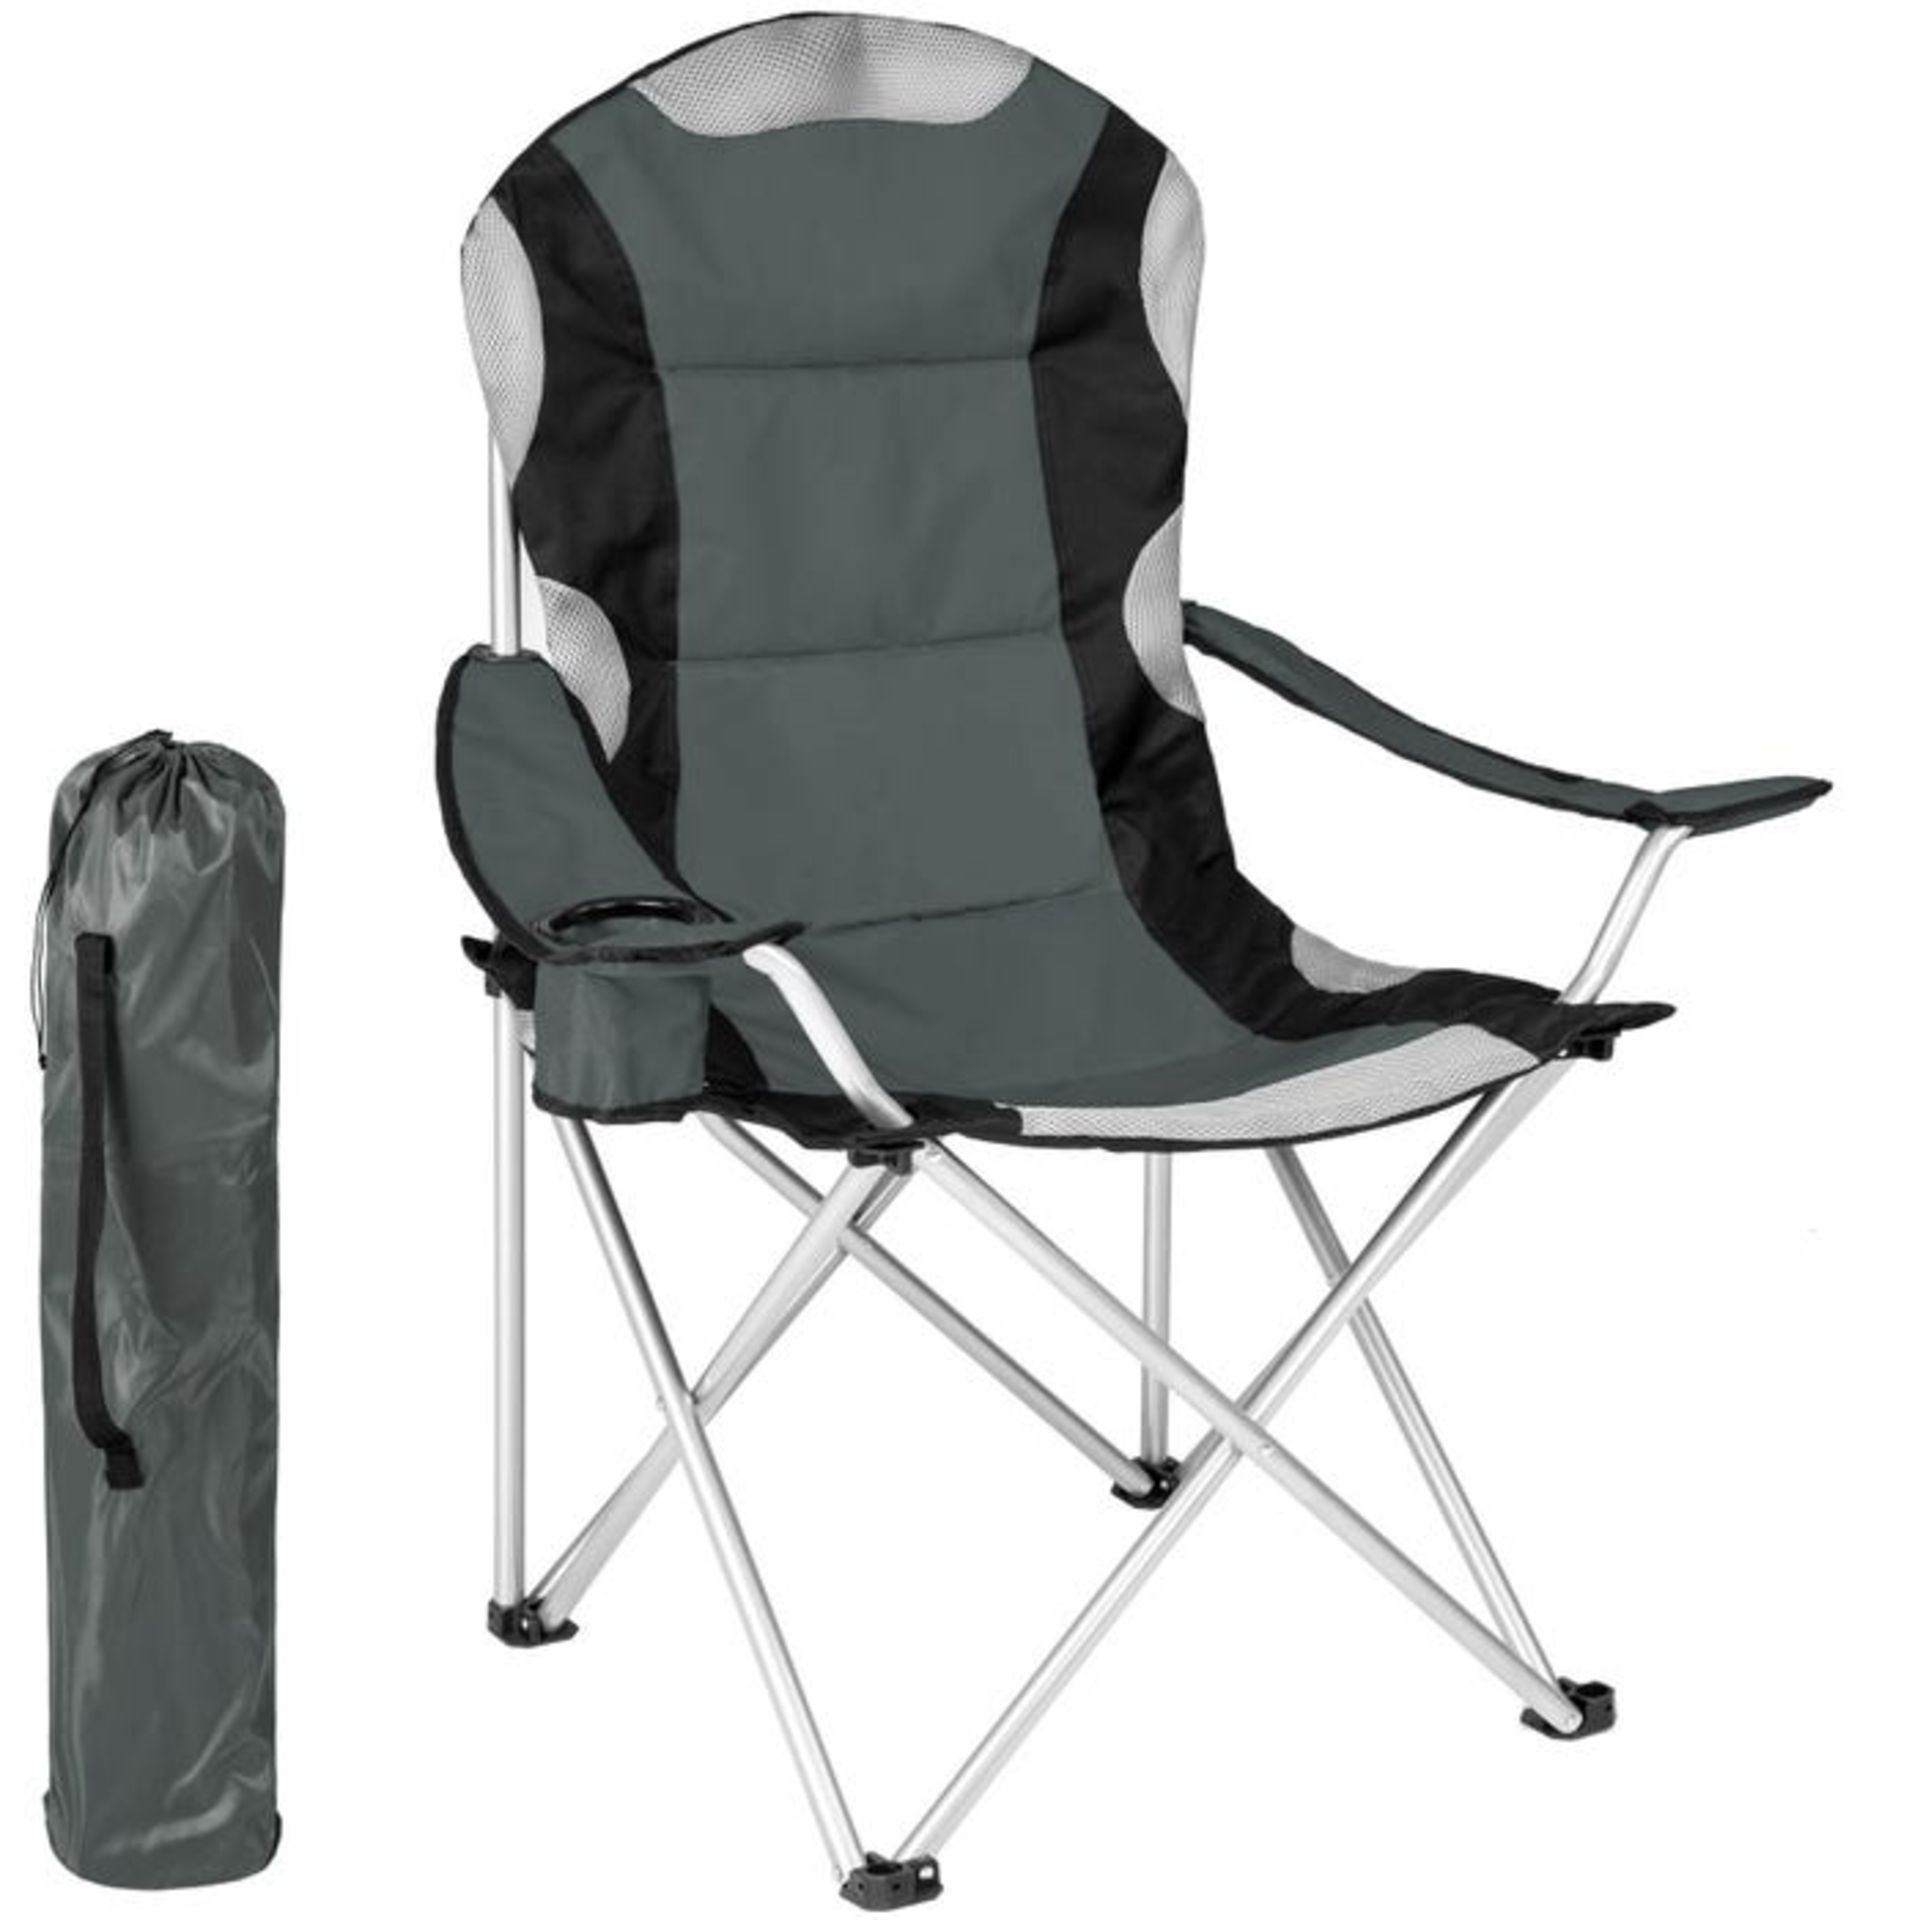 Tectake - Camping Chair - Padded Blue - Boxed. RRP £55.99 - Image 2 of 2